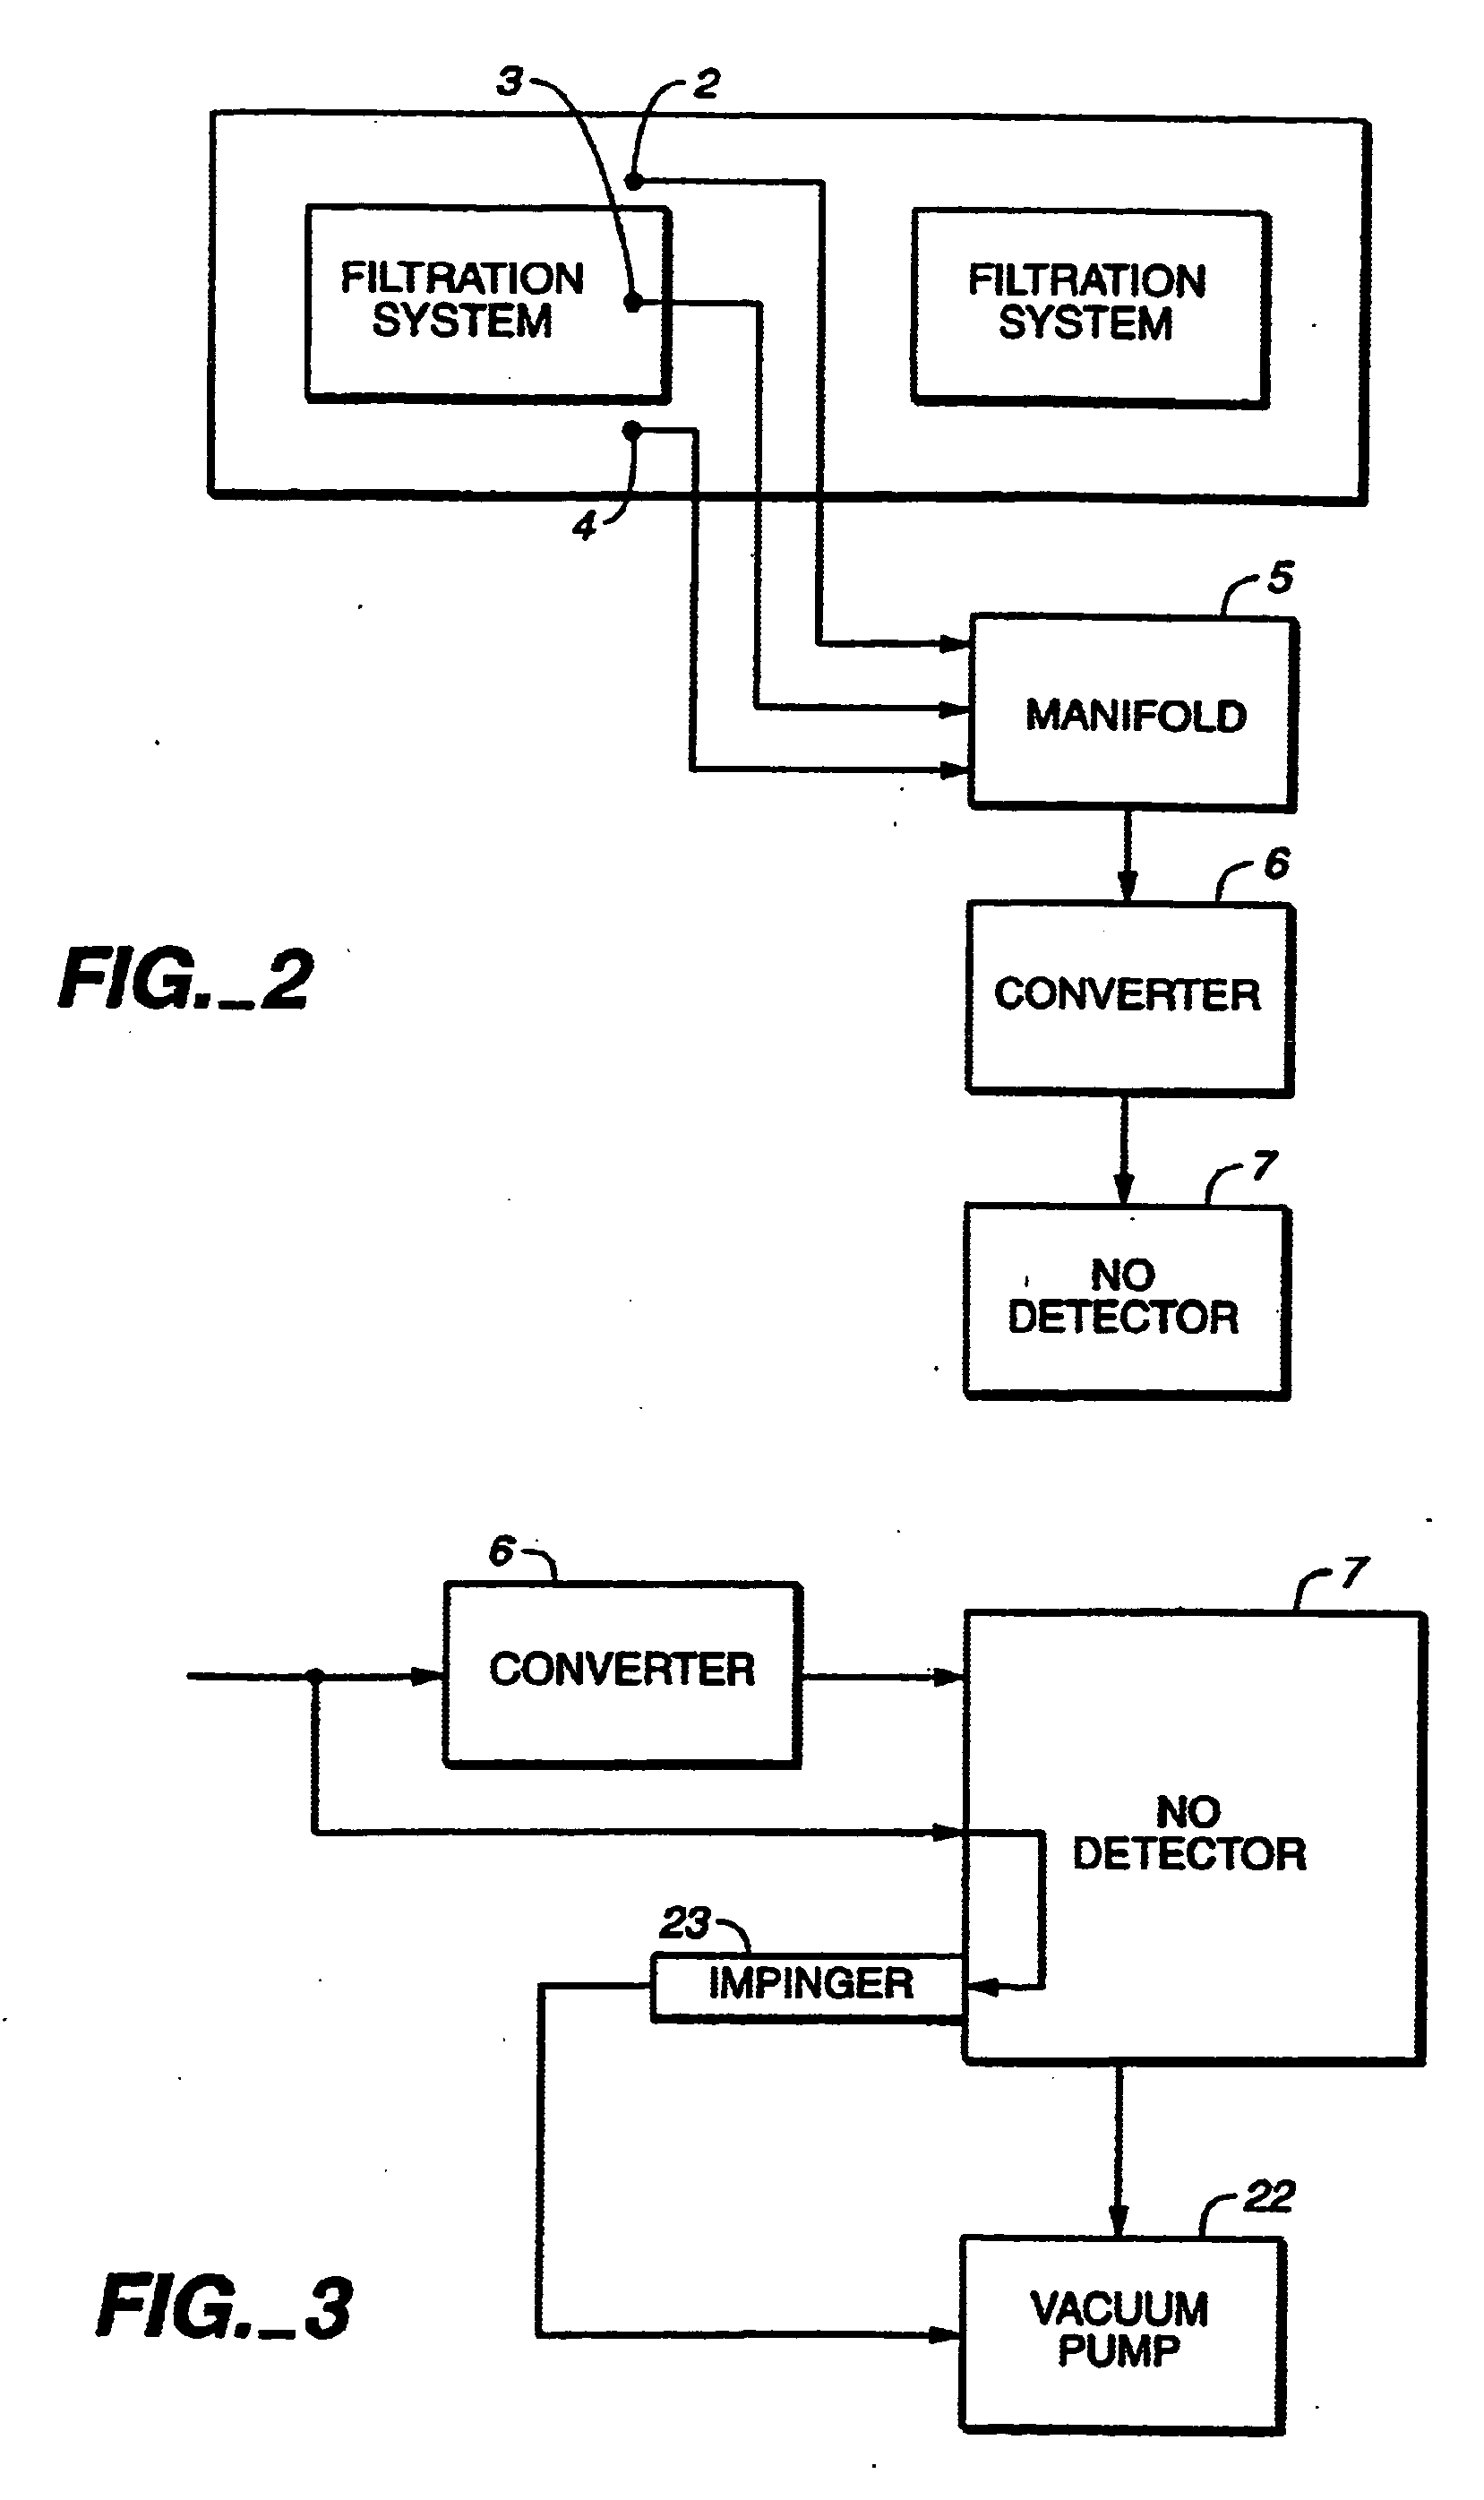 Protection of semiconductor fabrication and similar sensitive processes